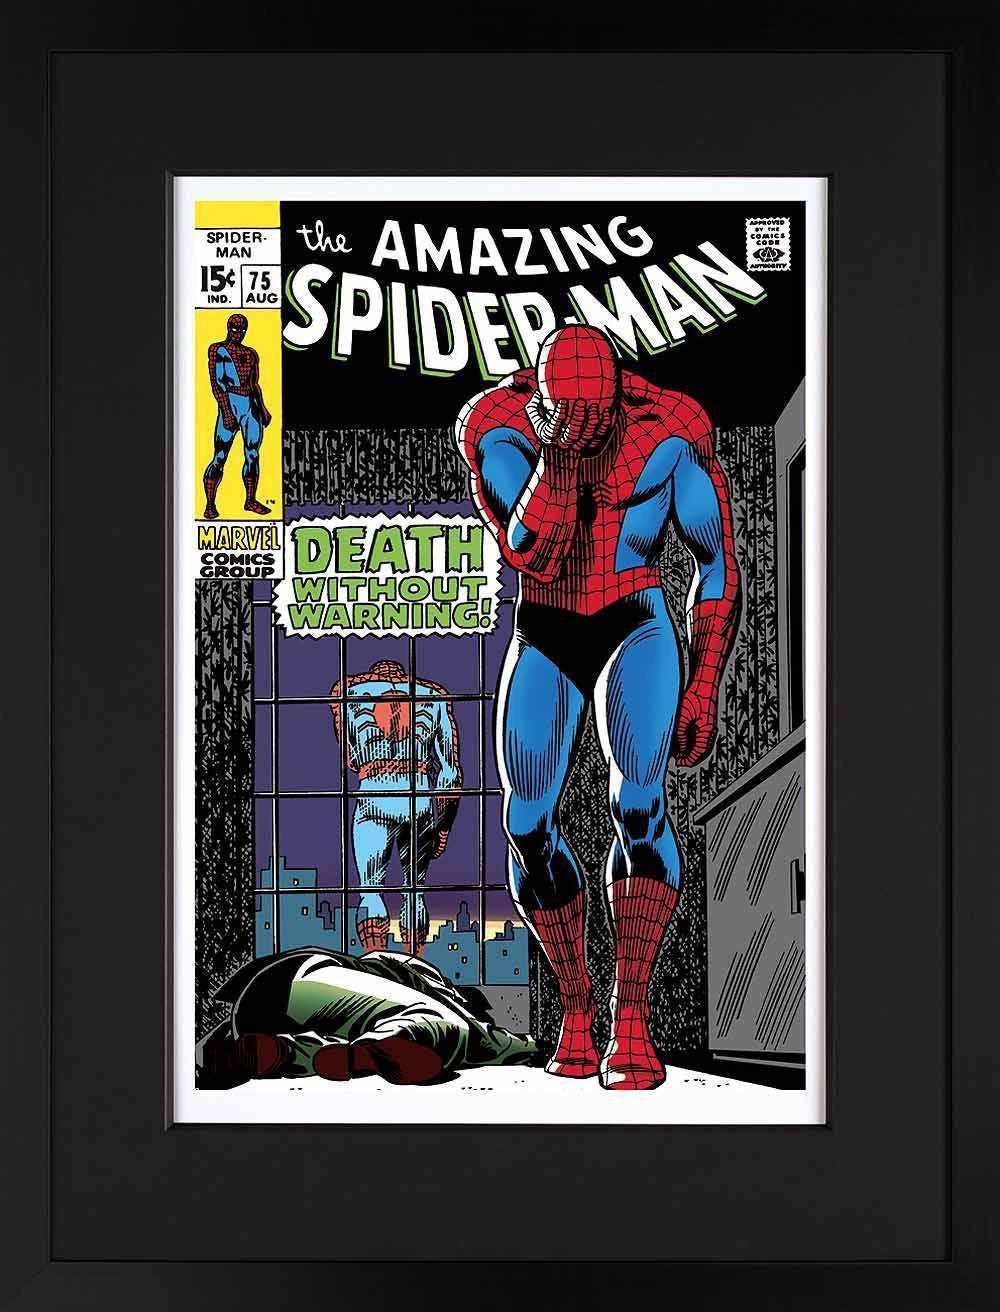 The Amazing Spider-Man #75 - Death Without Warning! - SOLD OUT Stan Lee The Amazing Spider-Man #75 - Death Without Warning! - SOLD OUT